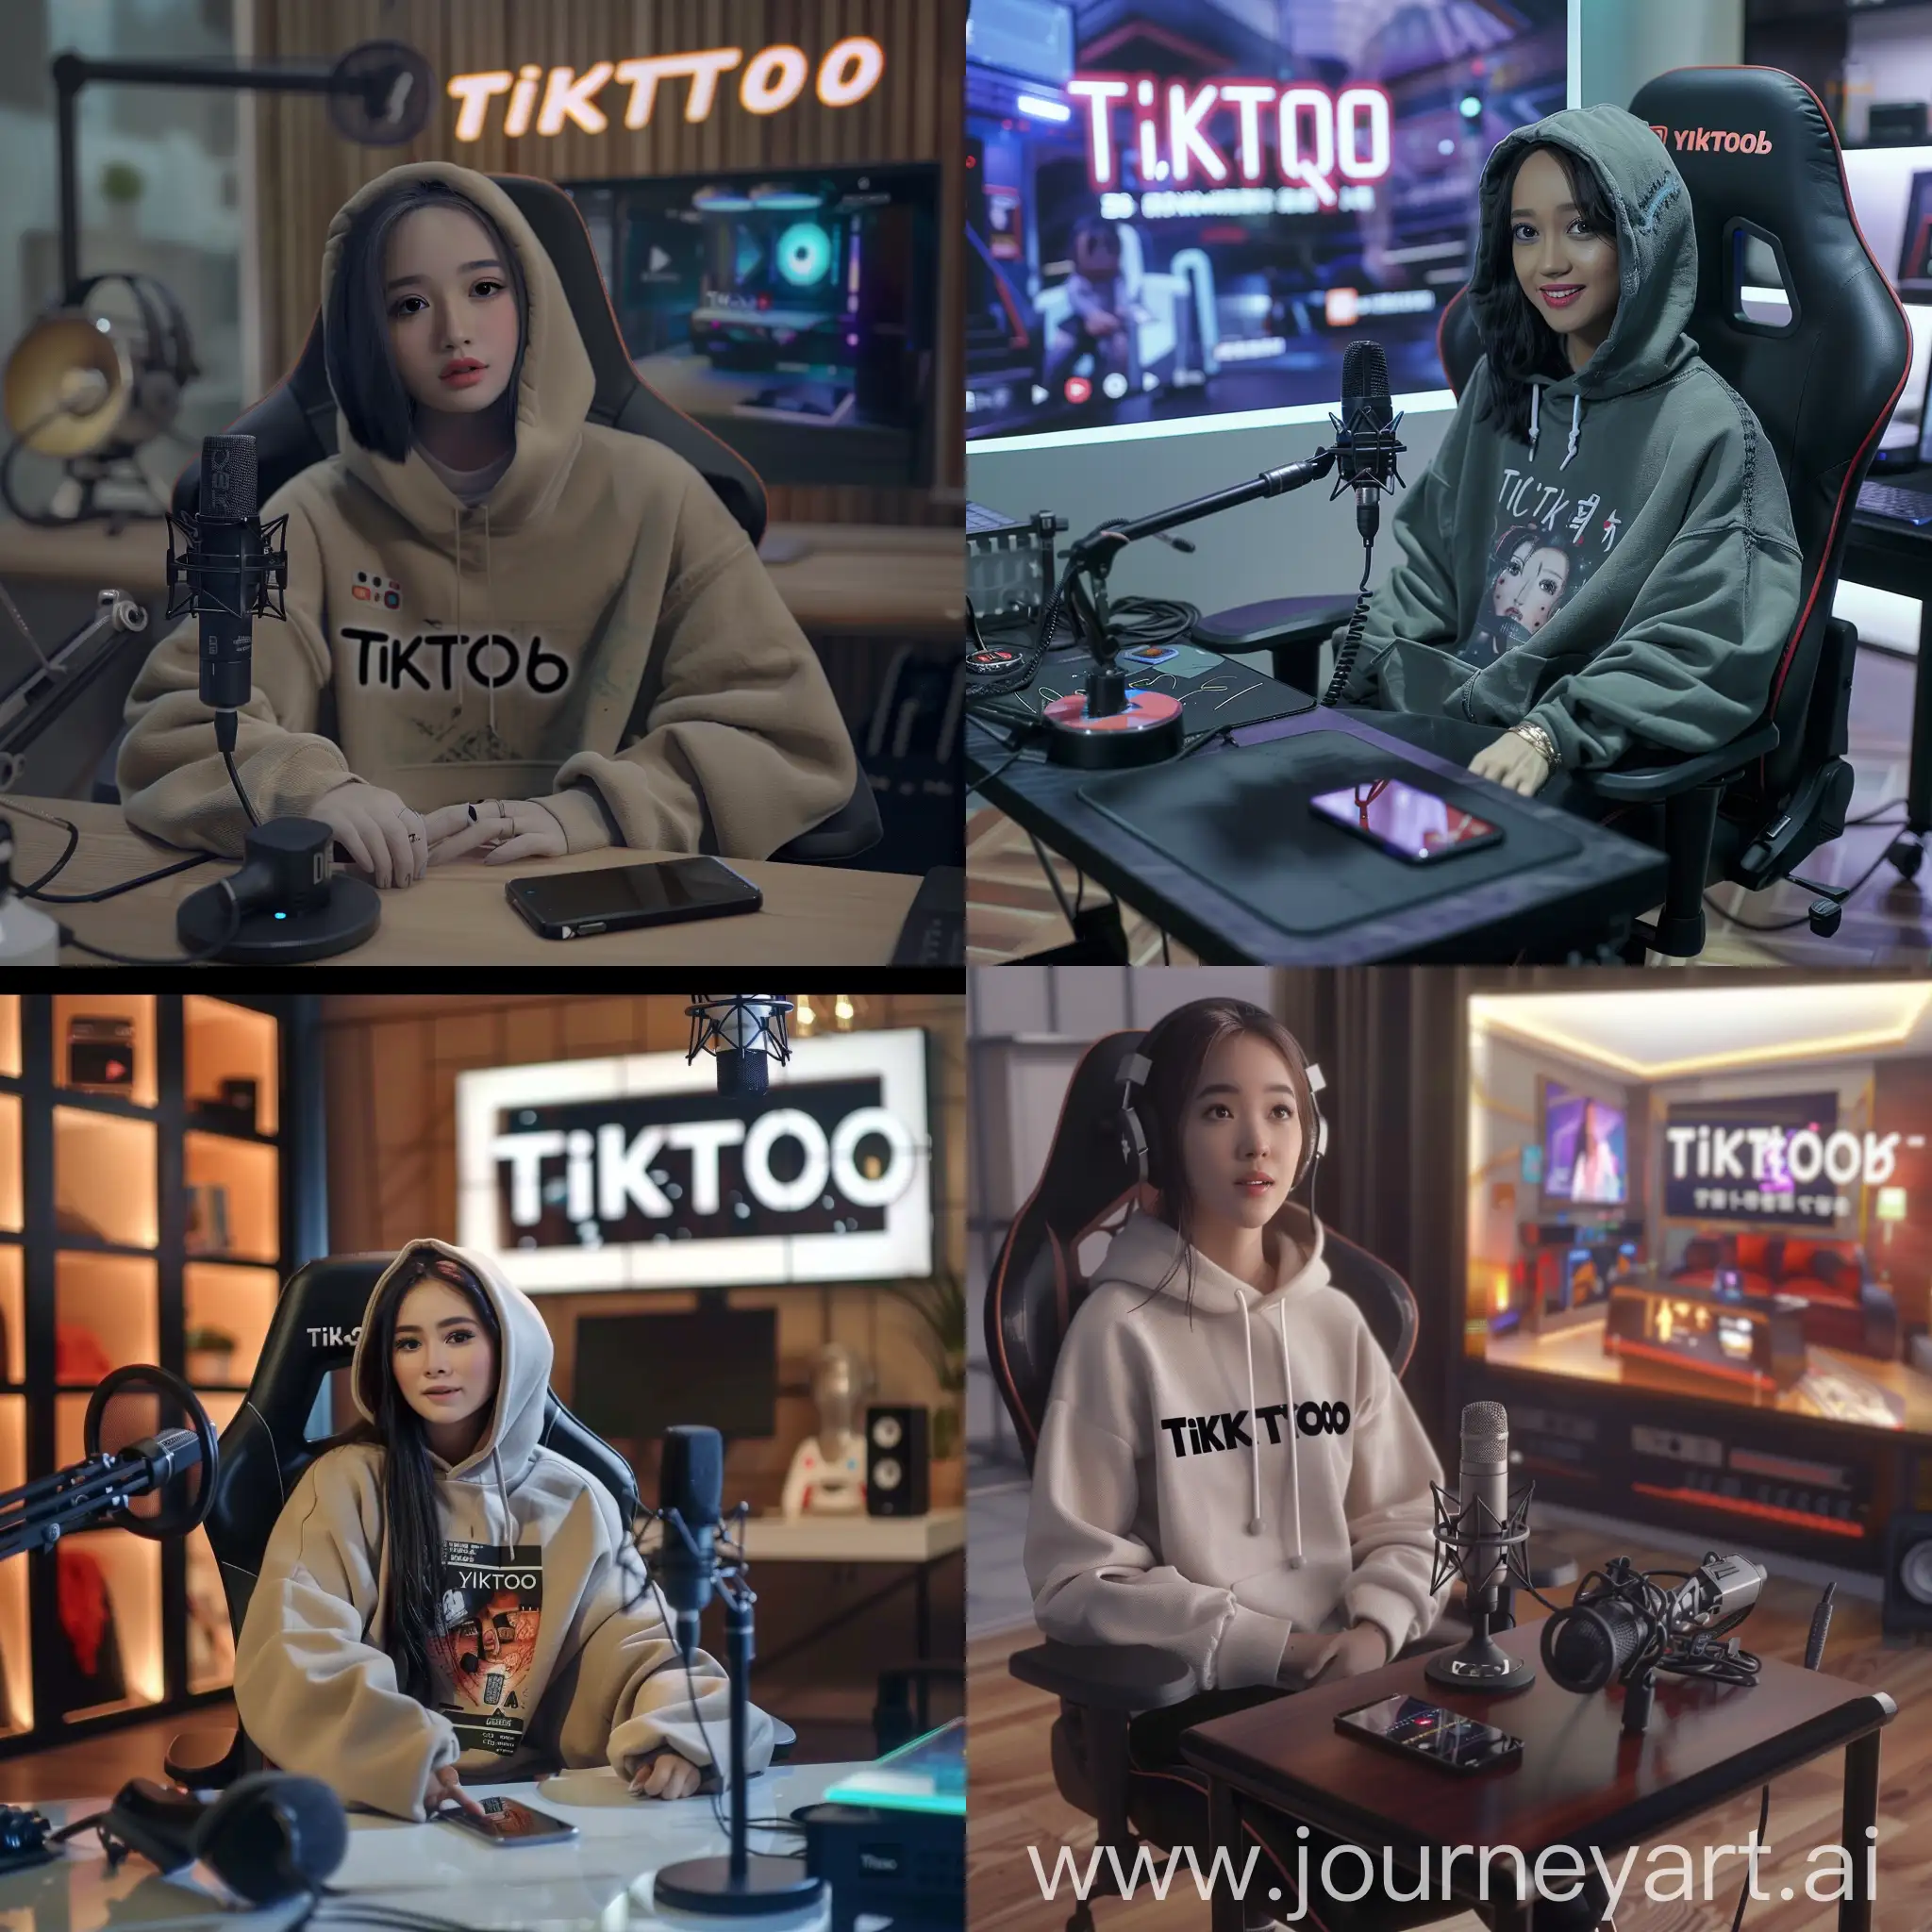 A 32-year-old Indonesian woman is podcasting on the TikTok app, sitting on a gaming chair wearing a 'yanie' hoodie. In front of her, there is a microphone and an Apple phone on the table, with a realistic HD background of a room with 'TIKTOK' written on it.